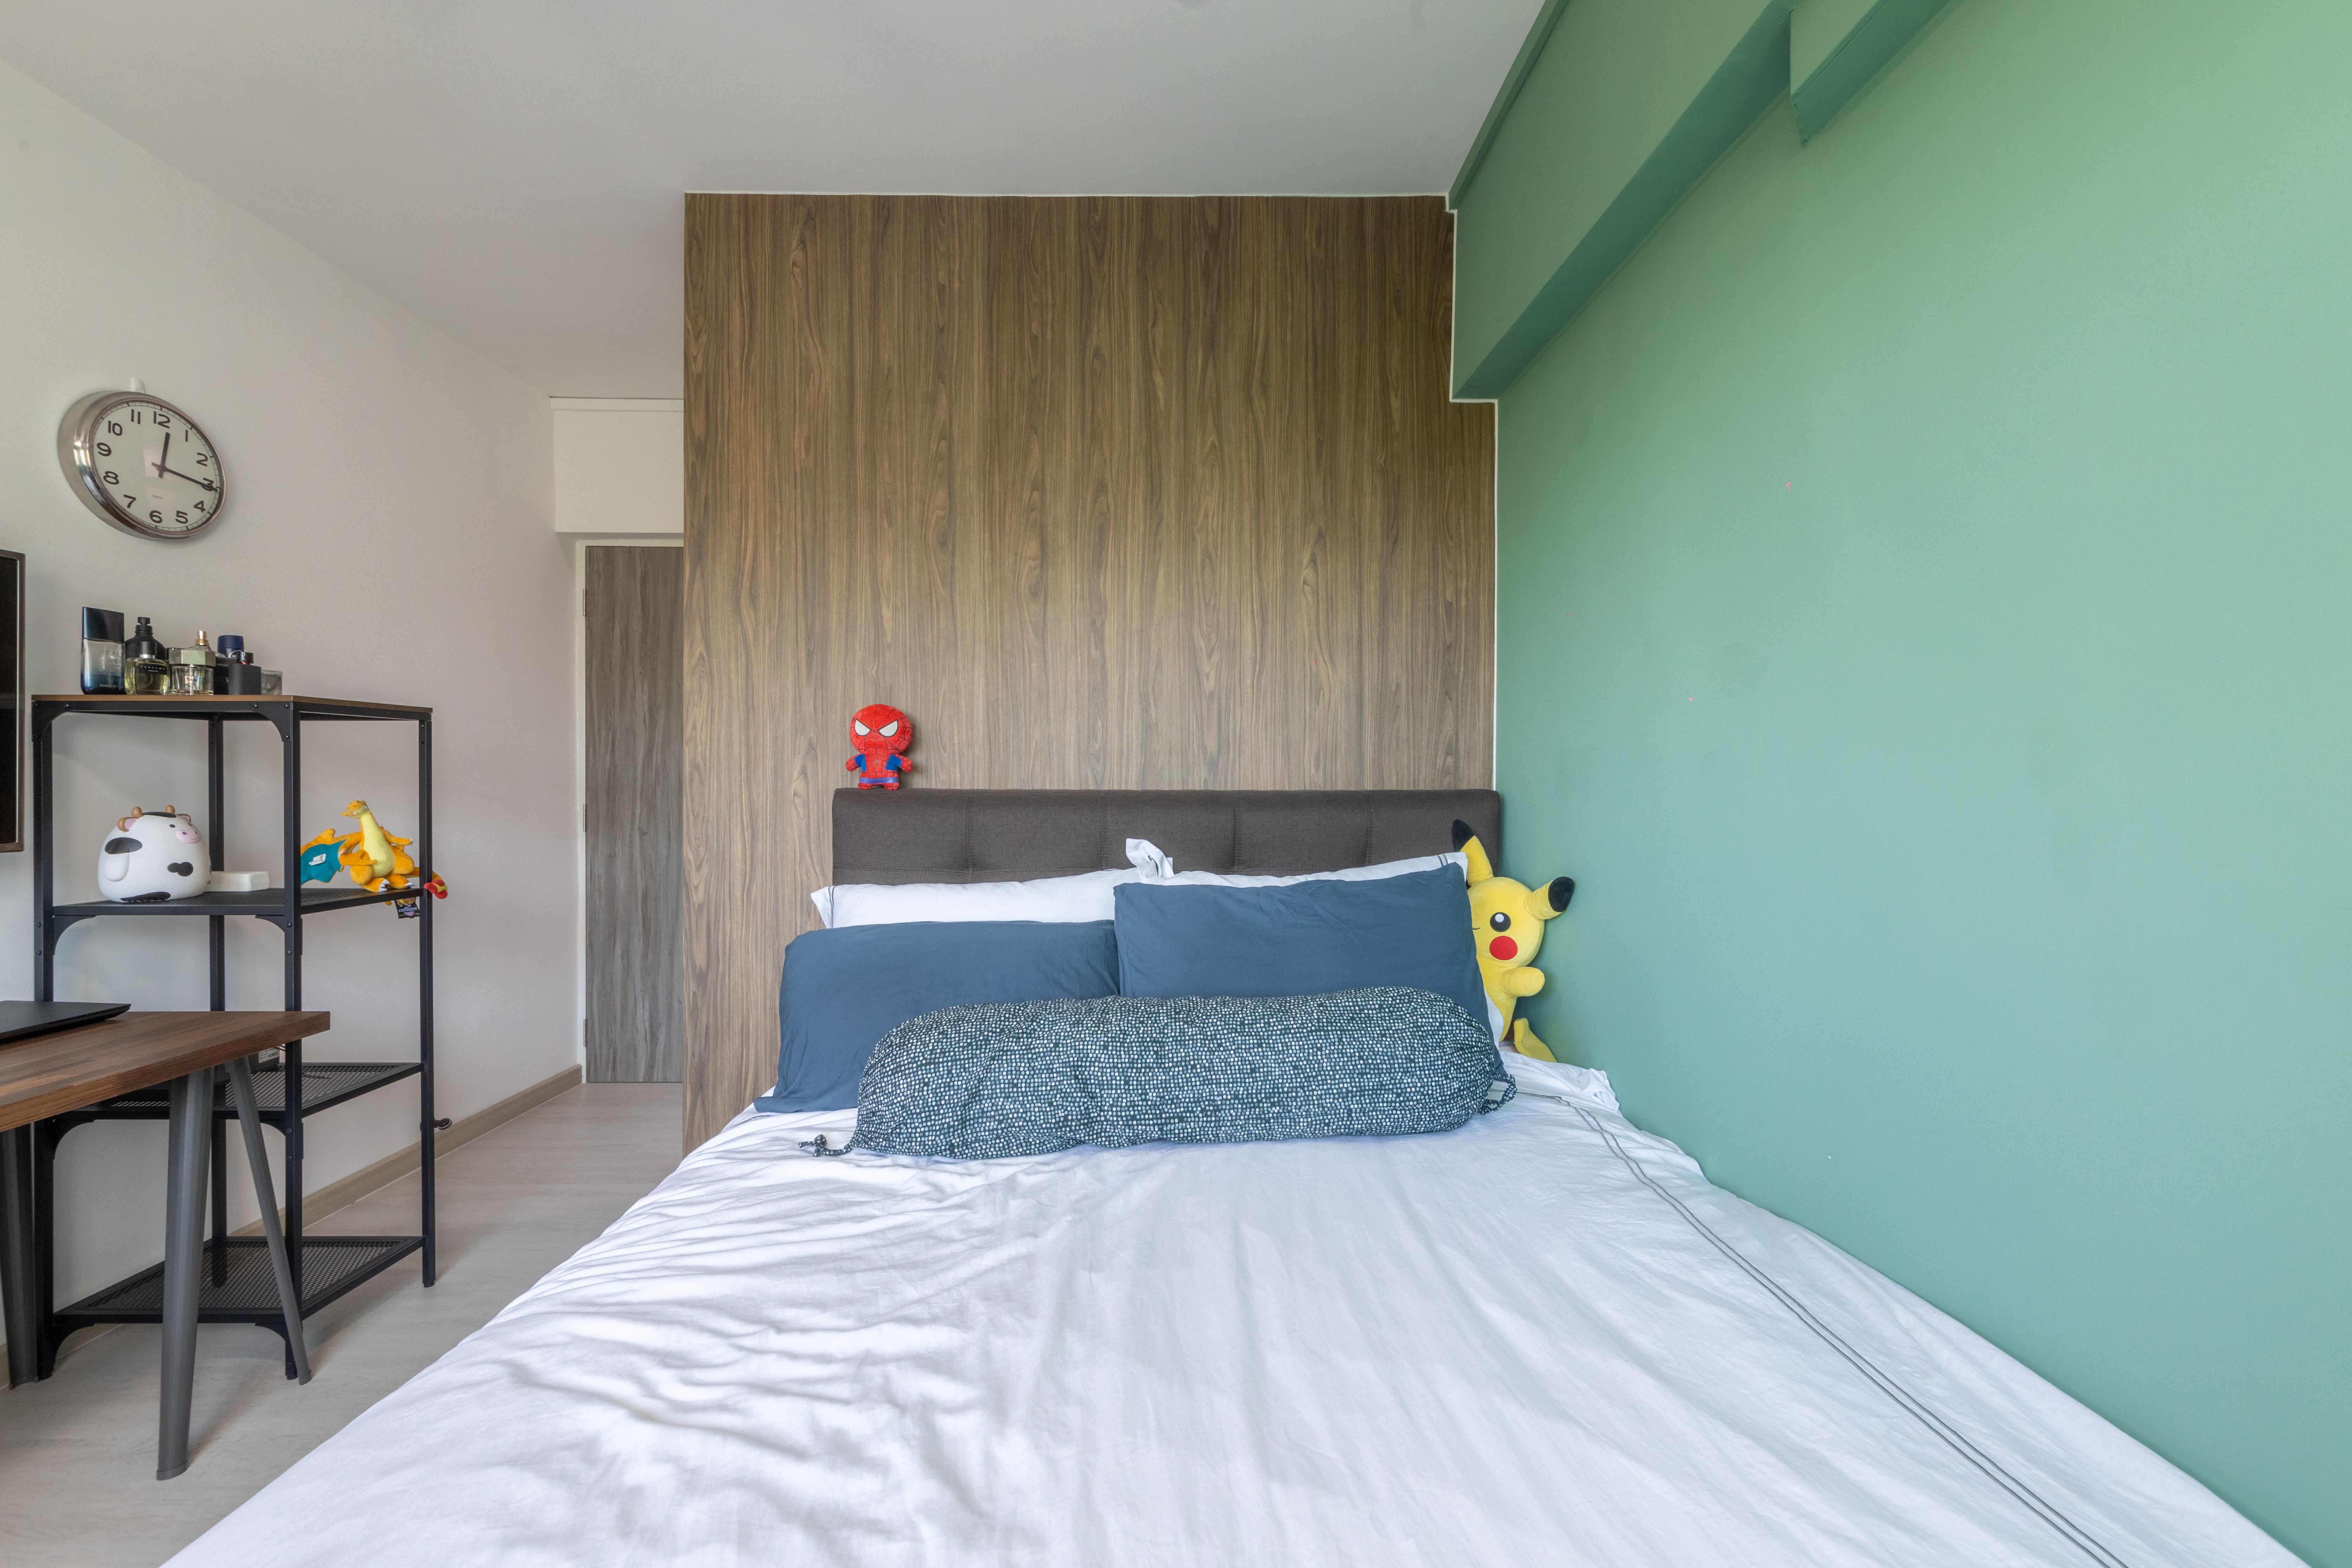 Minimalist Interior Design With Sea Green Wall And Cosy Double Bed